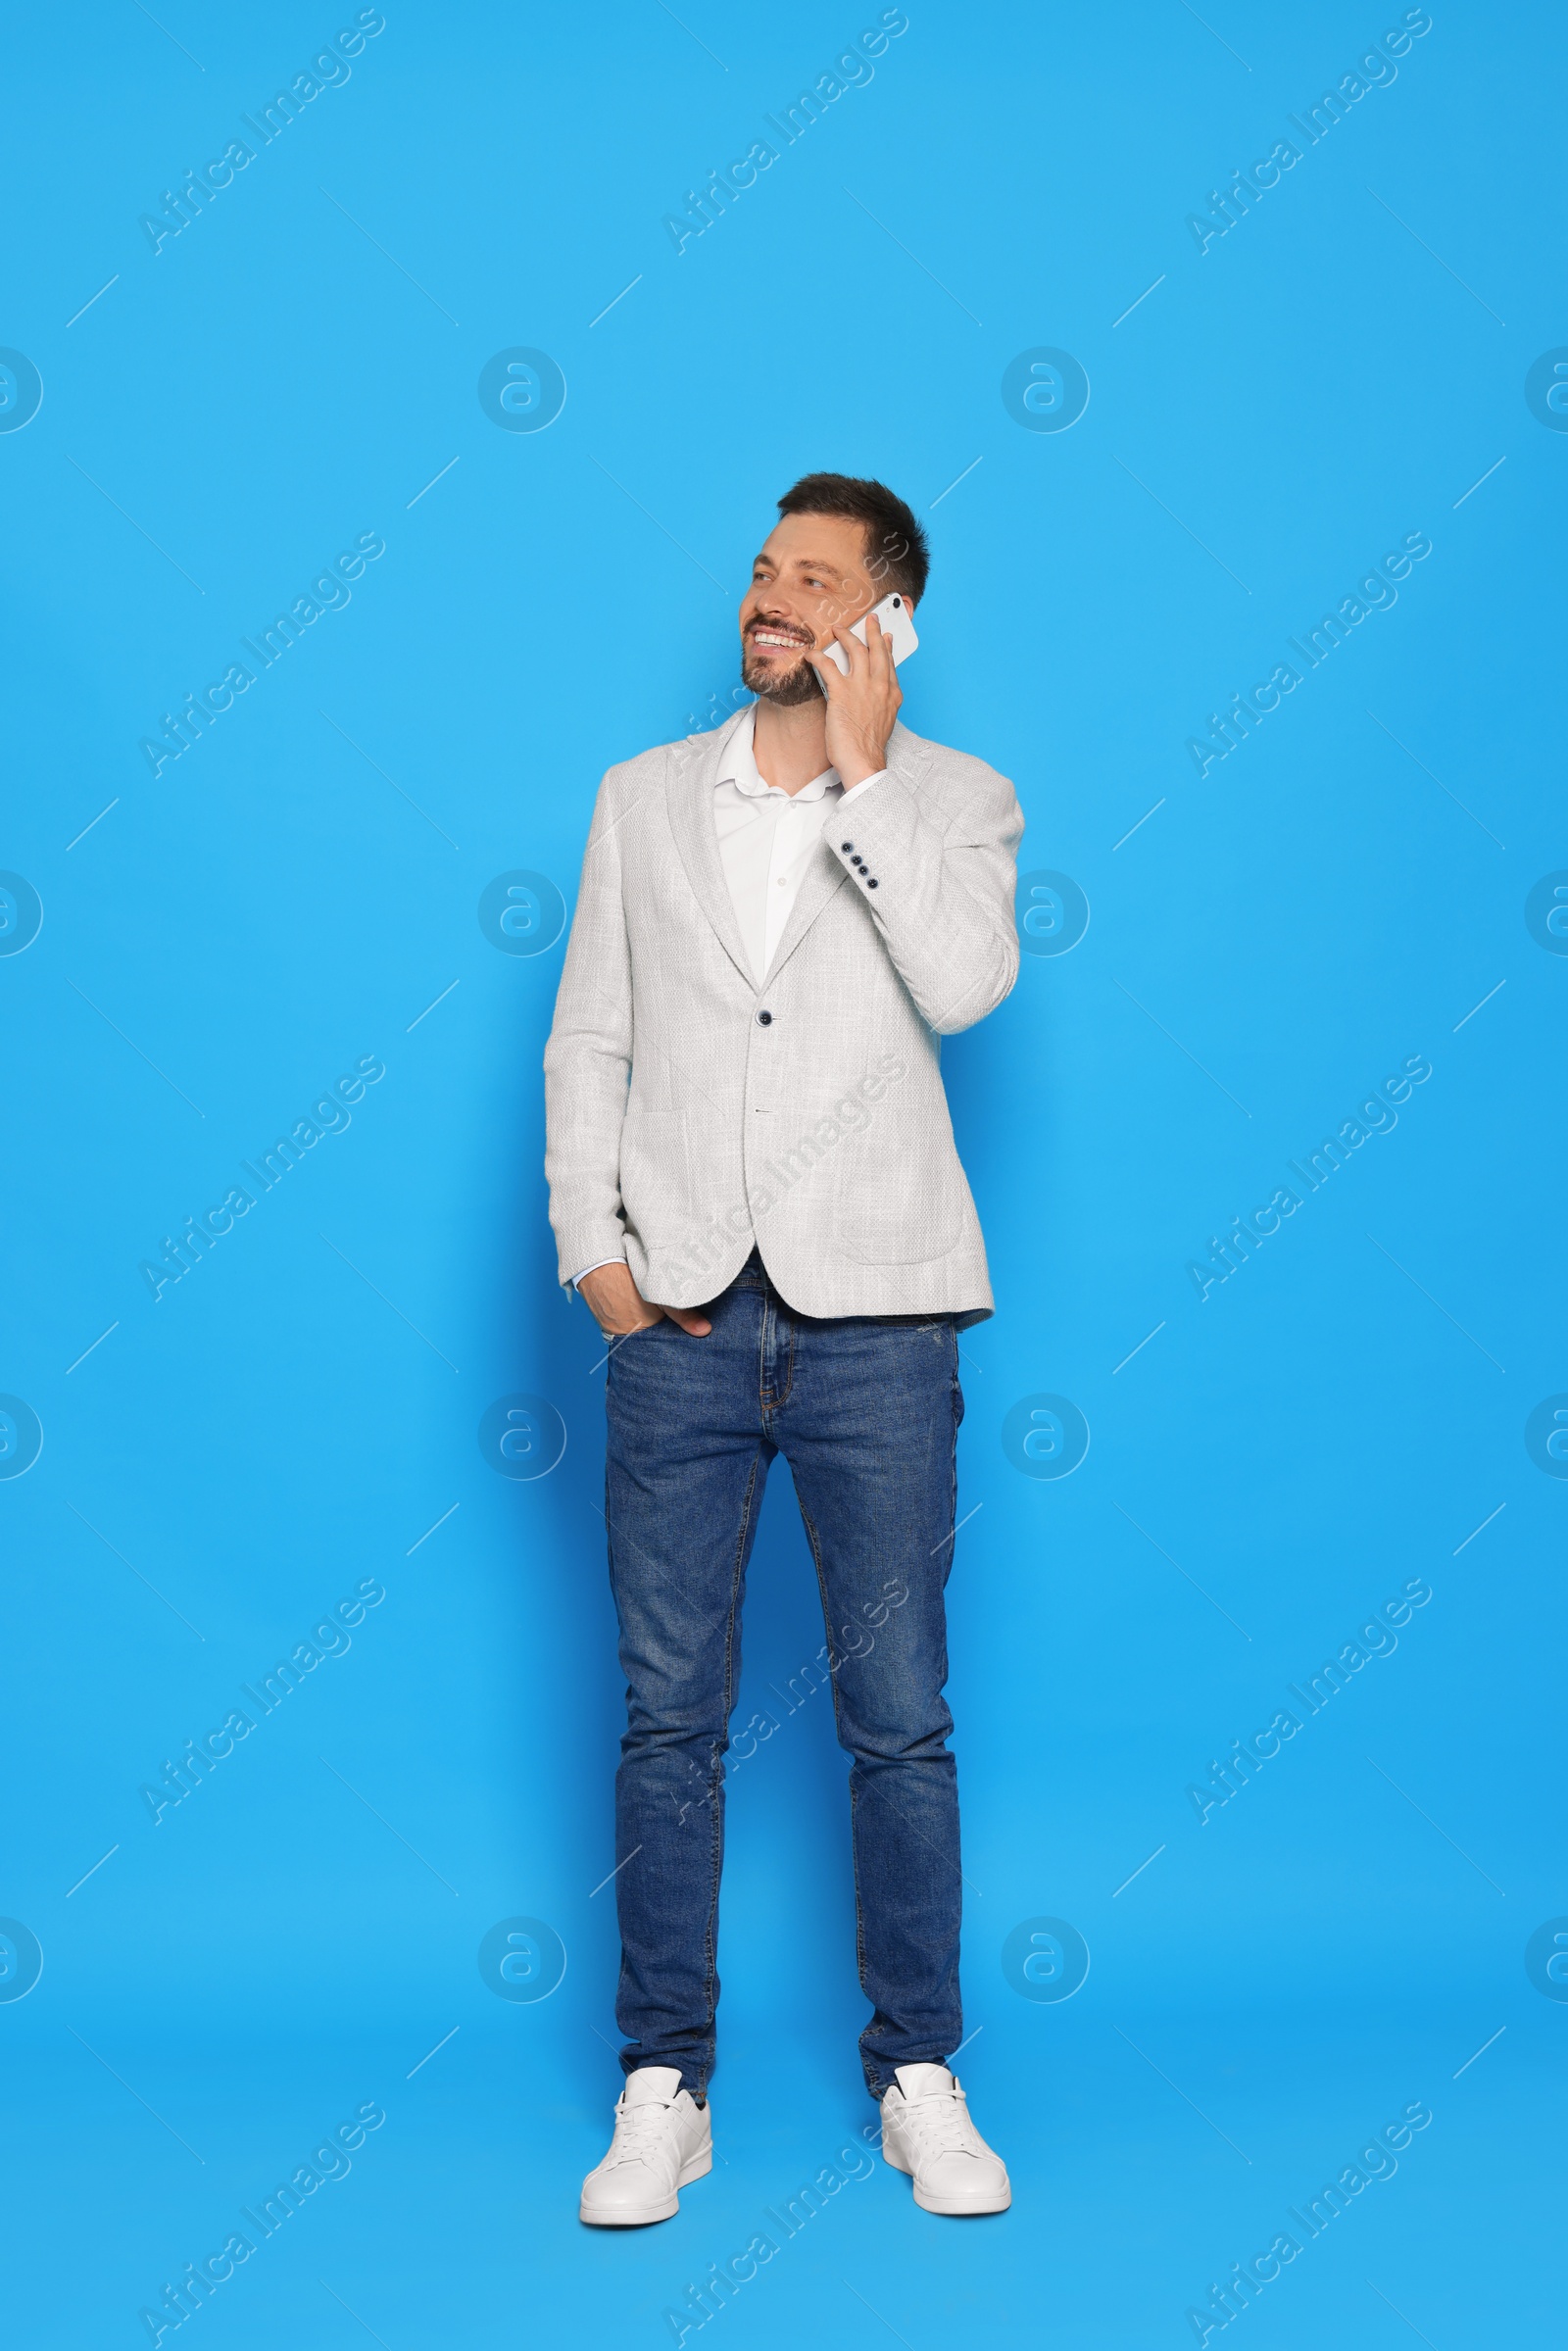 Photo of Handsome man talking on phone against light blue background